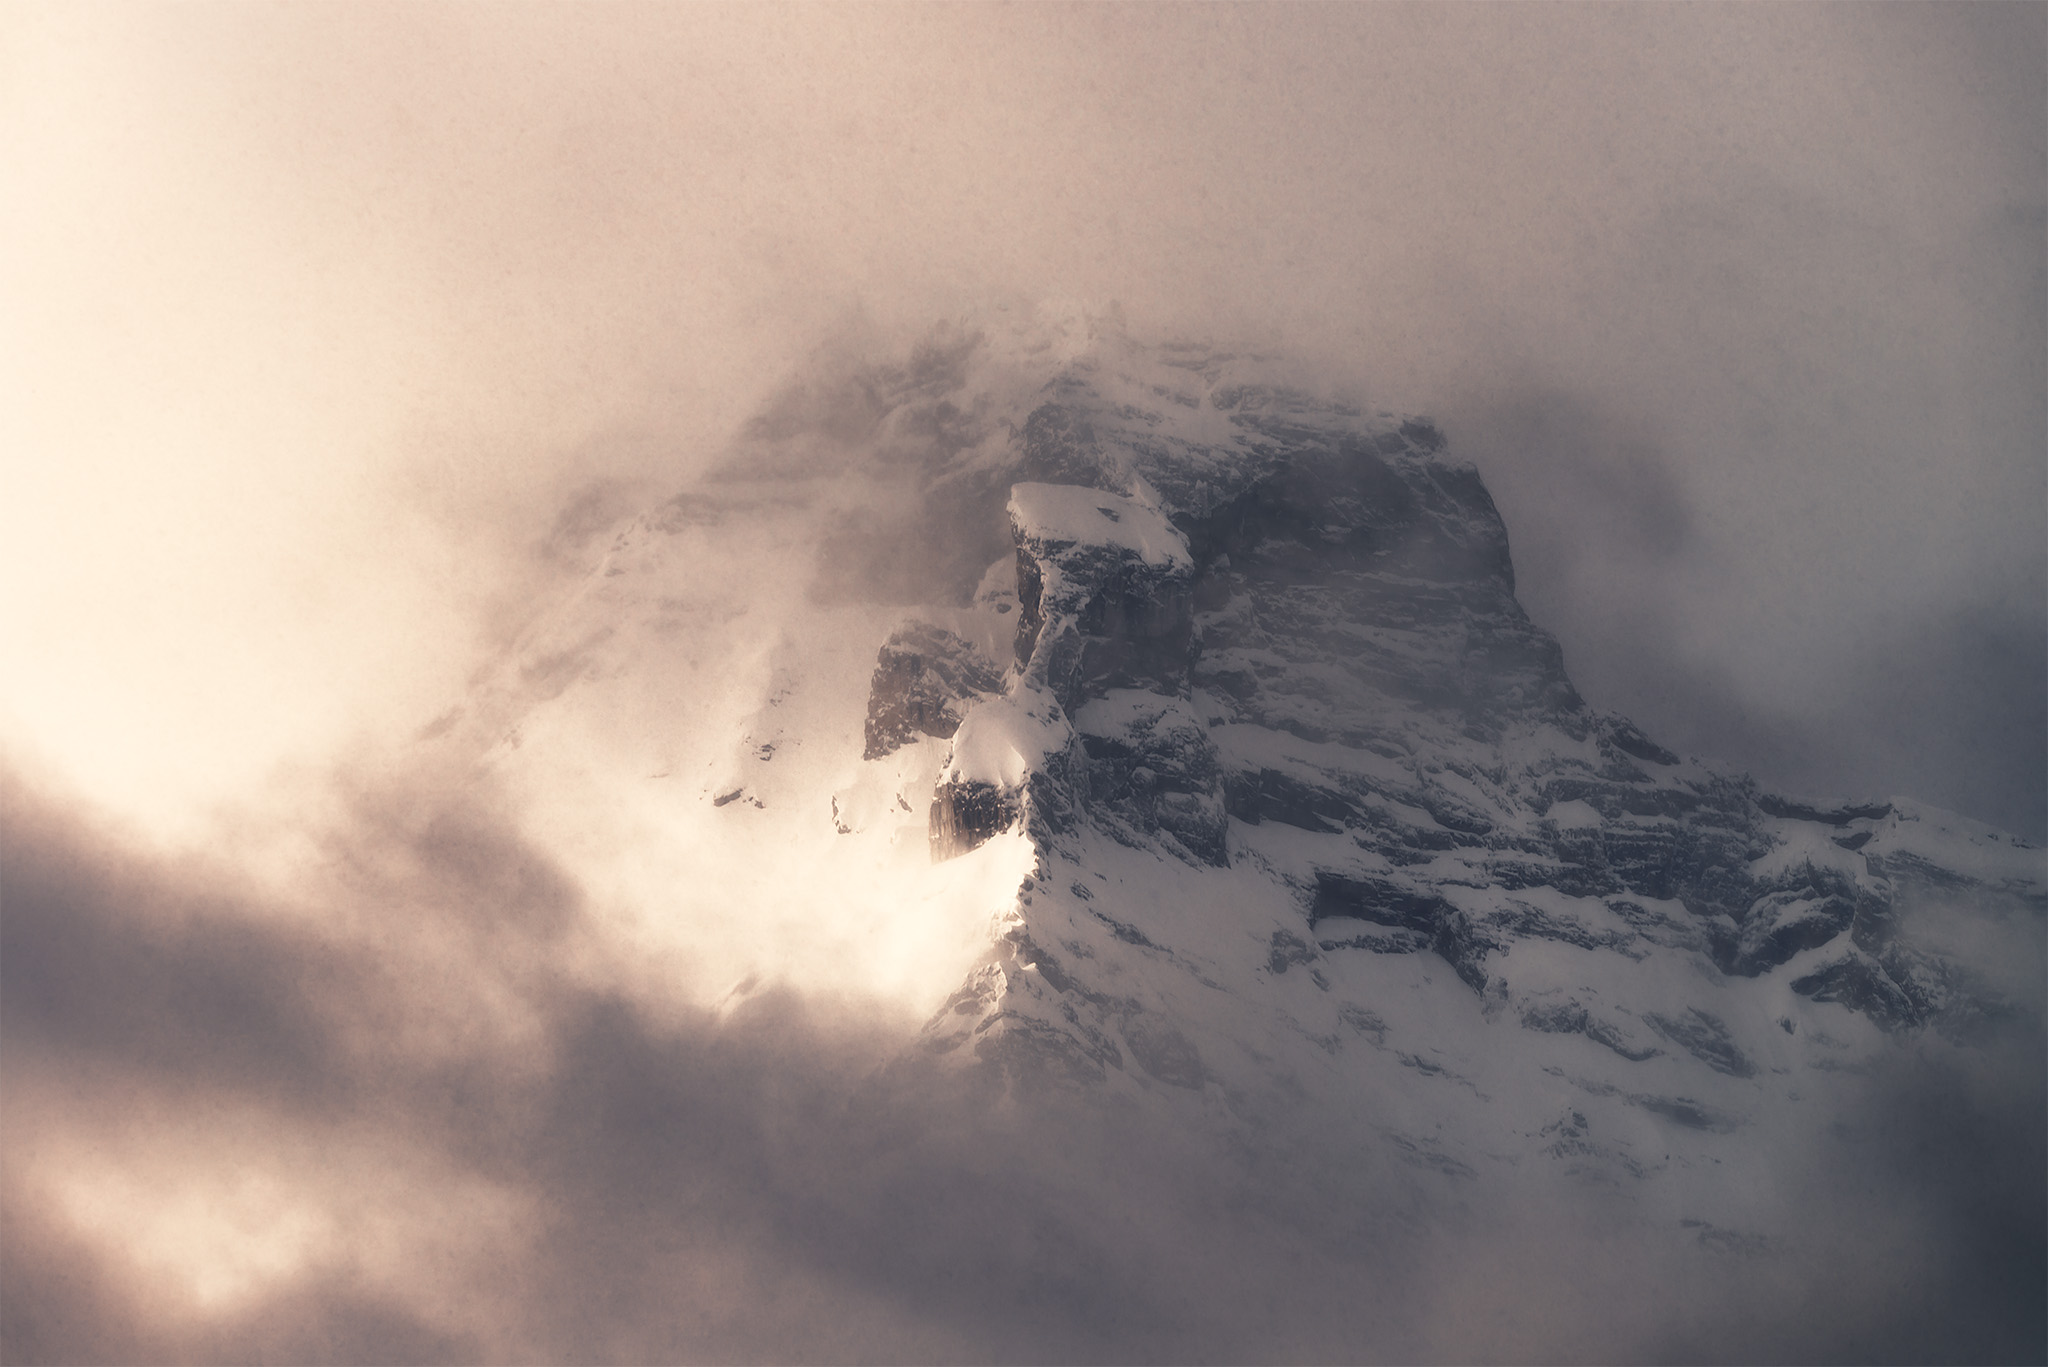 An intimate landscape photograph of a mountain peak surrounded by dramatic light and cloud in the Canadian Rockies